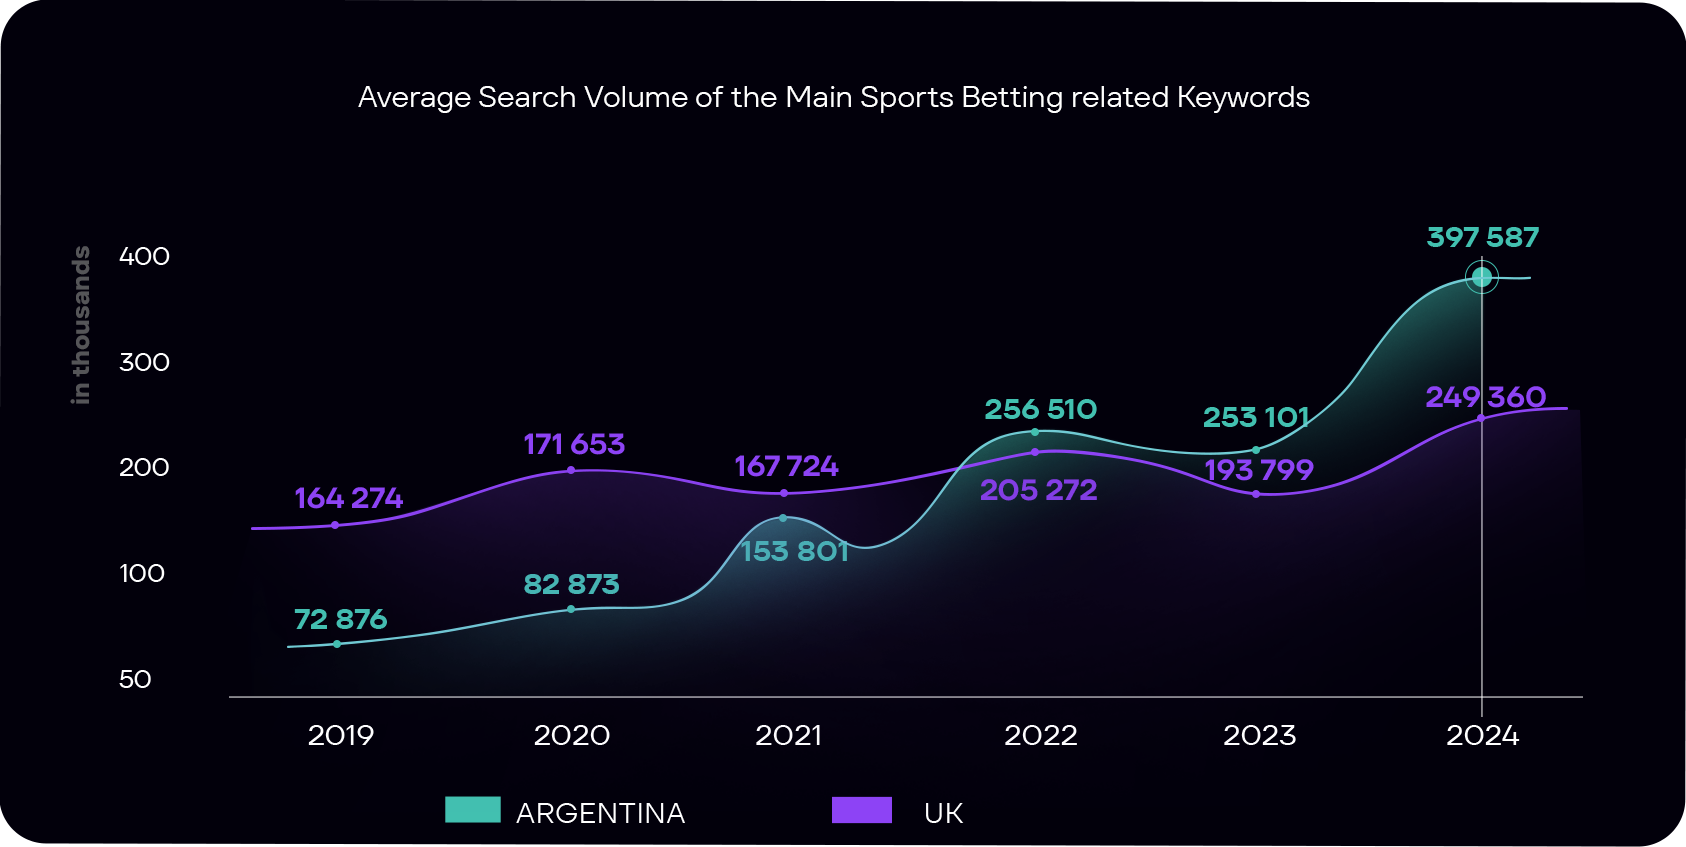 The comparison of main sports betting related keyword search volumes in Argentina and the United Kingdom